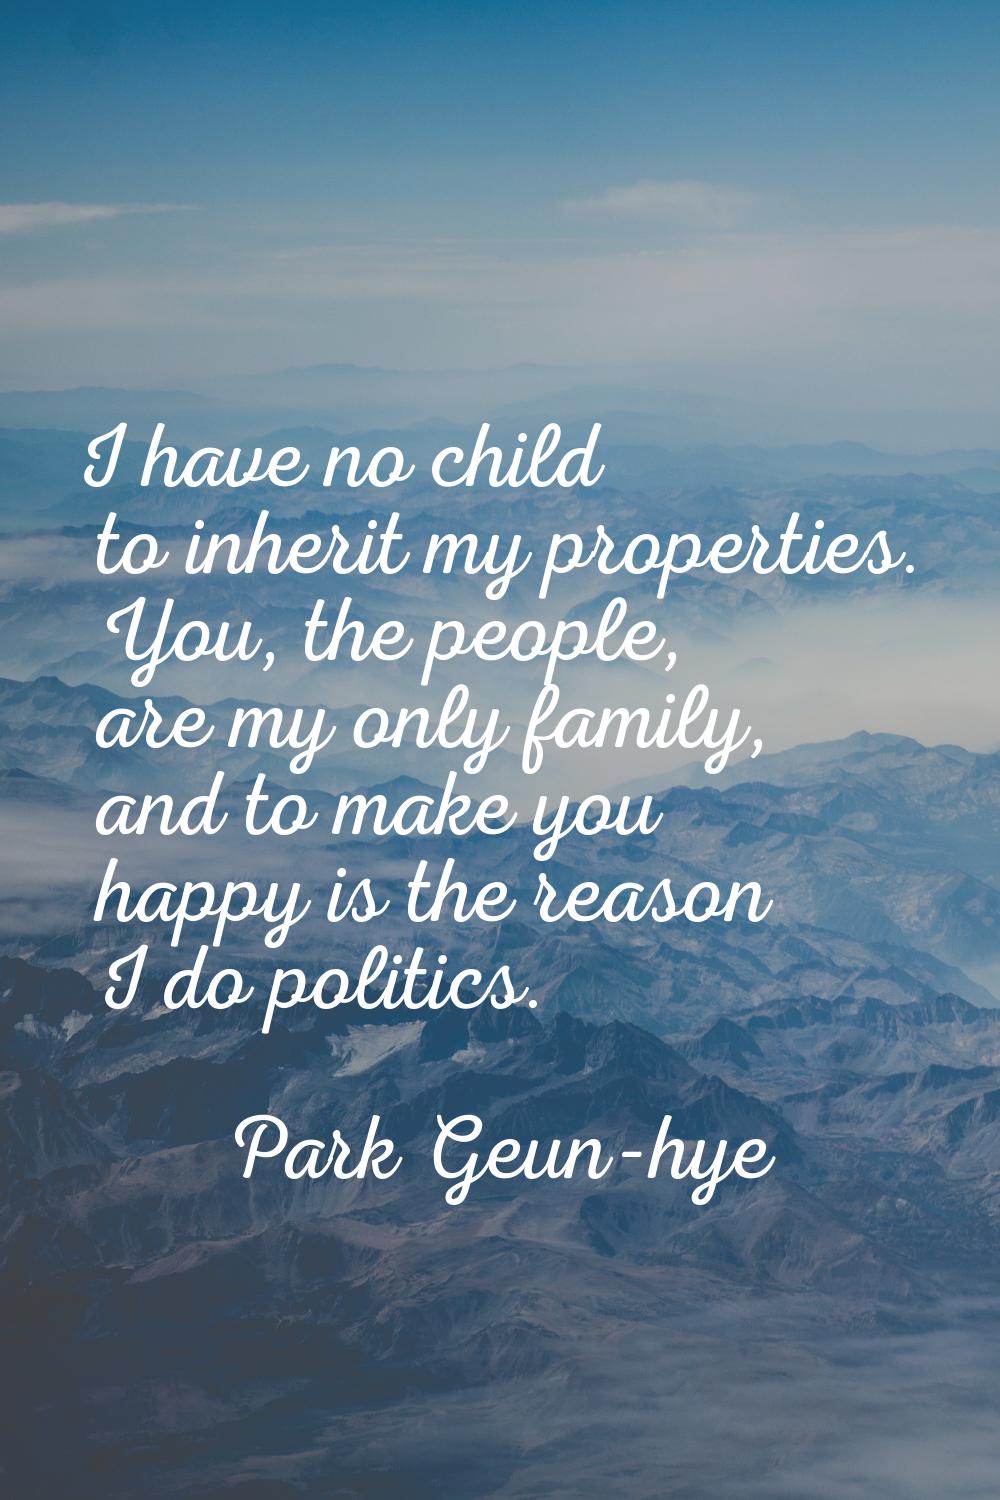 I have no child to inherit my properties. You, the people, are my only family, and to make you happ